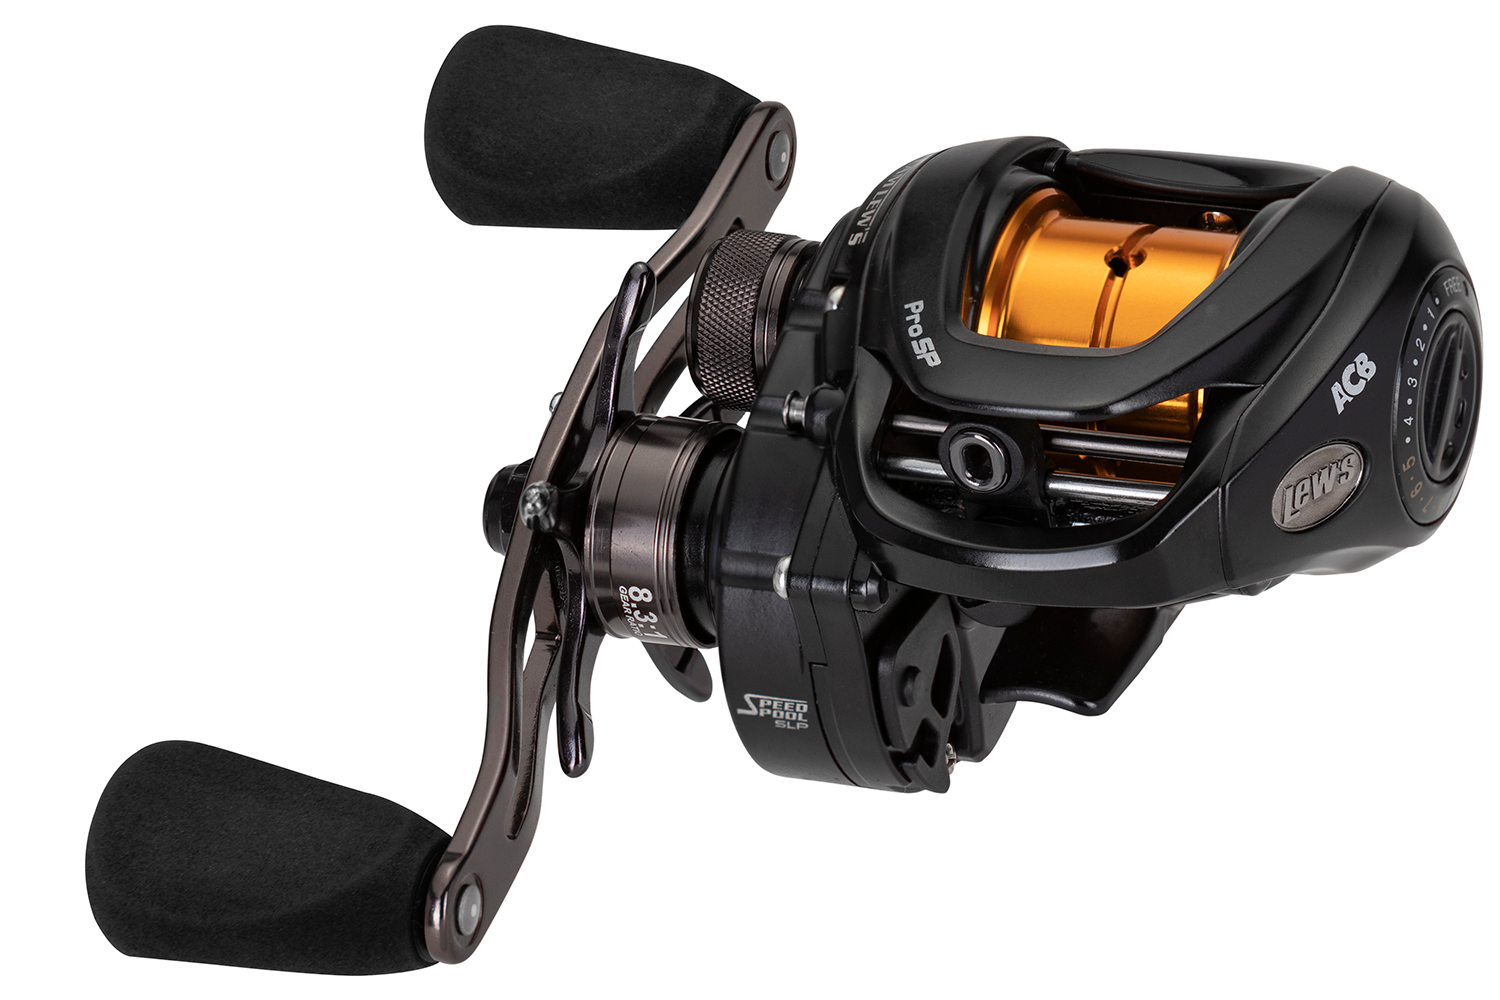 <p><b>Team Lews Pro SP</b></p>
<p>The new reel was created specifically for skipping and pitching, and features: One-piece aluminum super low-profile frame with strong, lightweight graphite sideplates, drilled and forged, anodized Duralumin 32mm shallow spool with Knot Slot. Hard anodized aluminum Speed Gears, cut on precision Hamai CNC gear hobbing machines P2 Super Pinion bearing supported pinion gear provides precise alignment and solid stability, resulting in for a smoother operation and extended gear life. Externally adjustable, 6-pin 27 position QuietCast Adjustable Centrifugal Braking system (ACB) with orange skipping zone. Premium 9-bearing system with double-shielded stainless-steel ball bearings and Zero Reverse one-way clutch bearing. Anodized aluminum spool tension adjustment with audible click. Rugged carbon fiber drag system provides up to 20lbs. of drag power. Bowed lightweight 95mm aluminum reel handle with EVA knobs</p>
<p><a href=